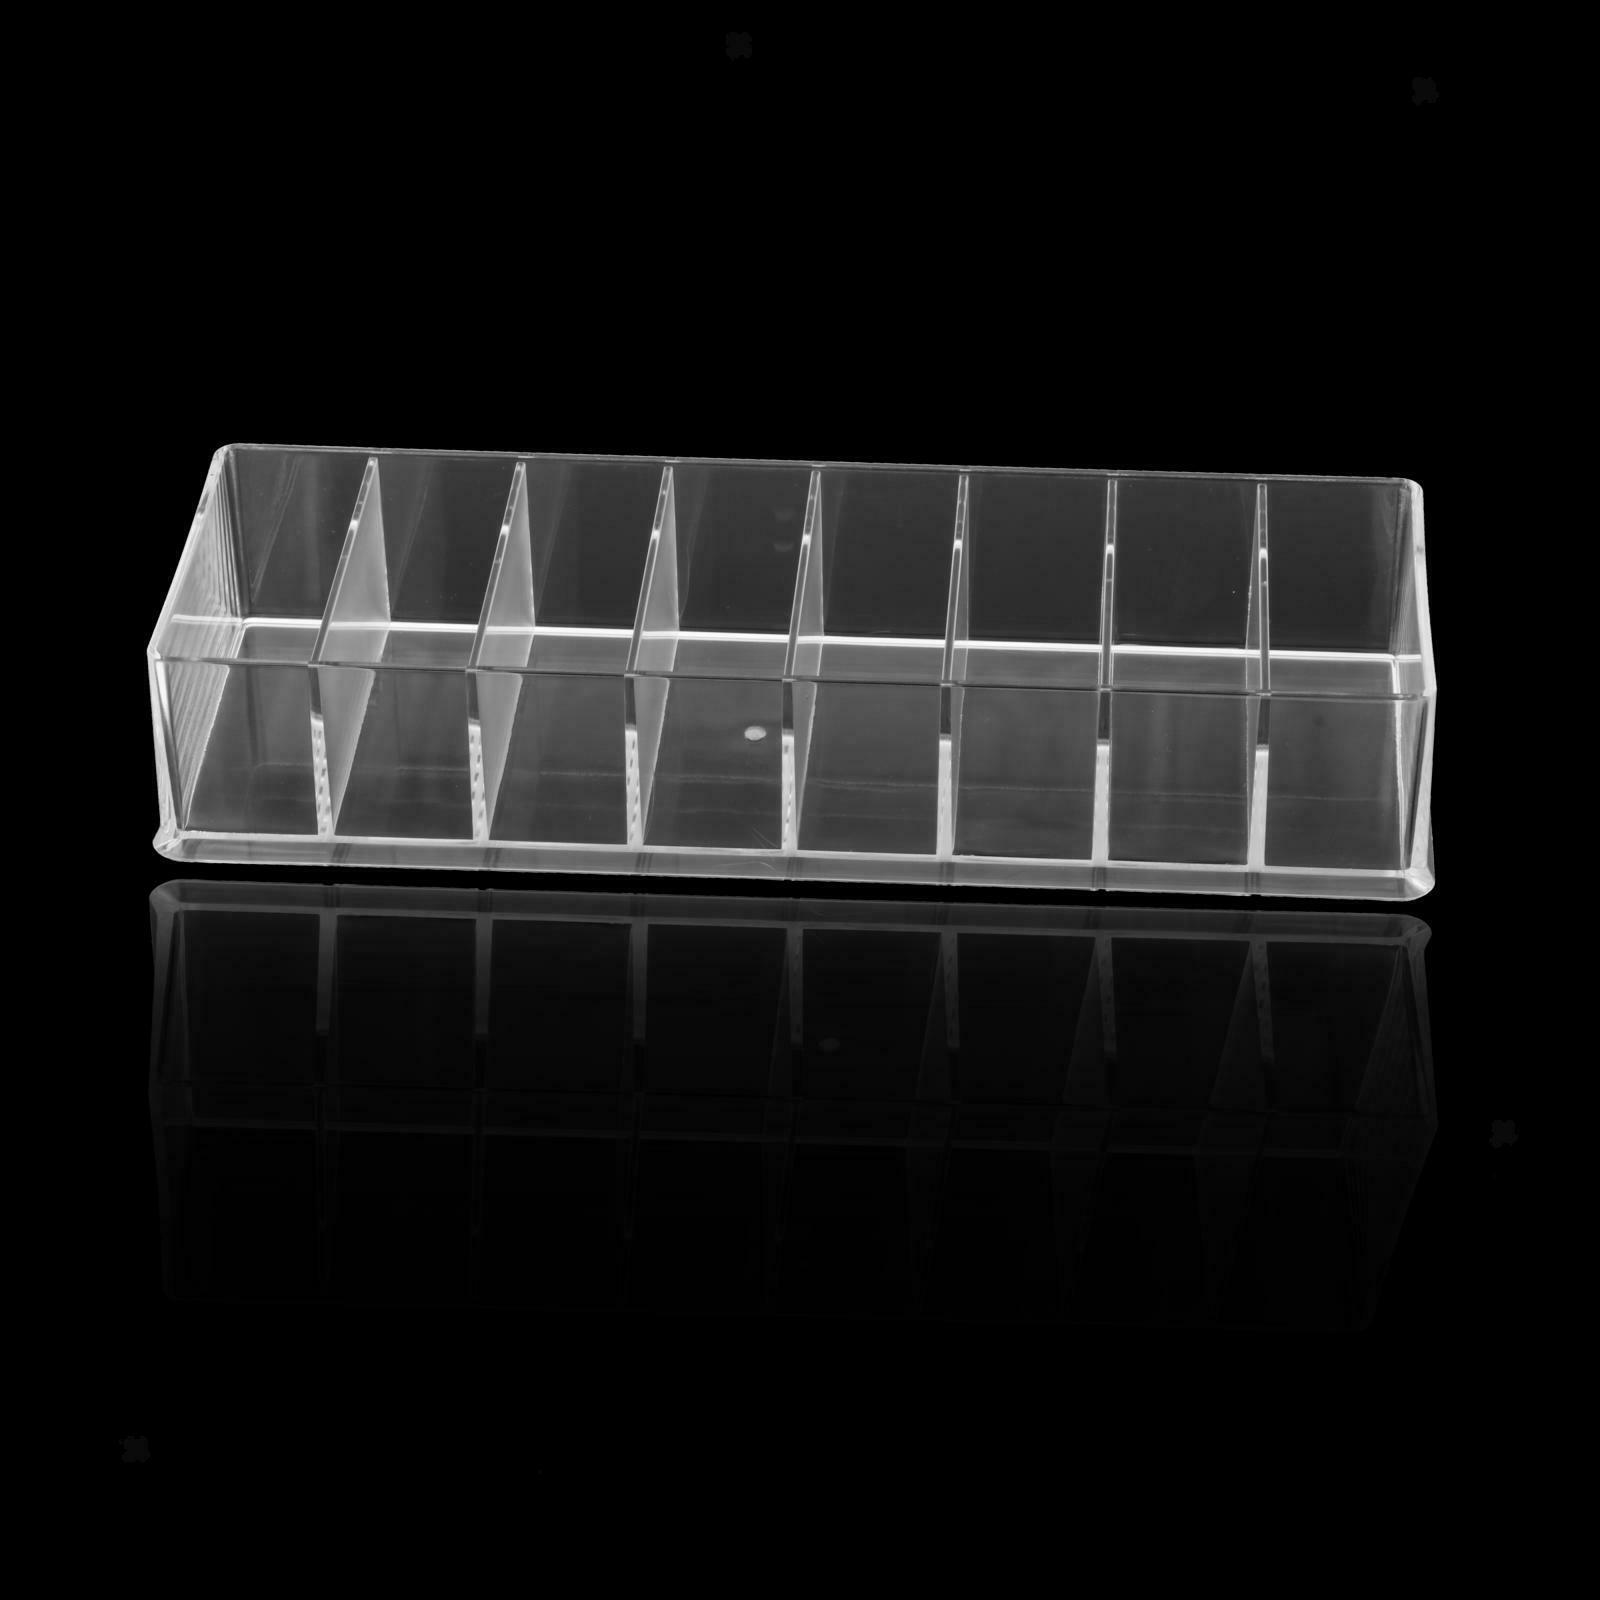 Plastic Organizer Box Japanese Style for Data Cable Bluetooth Headset Travel